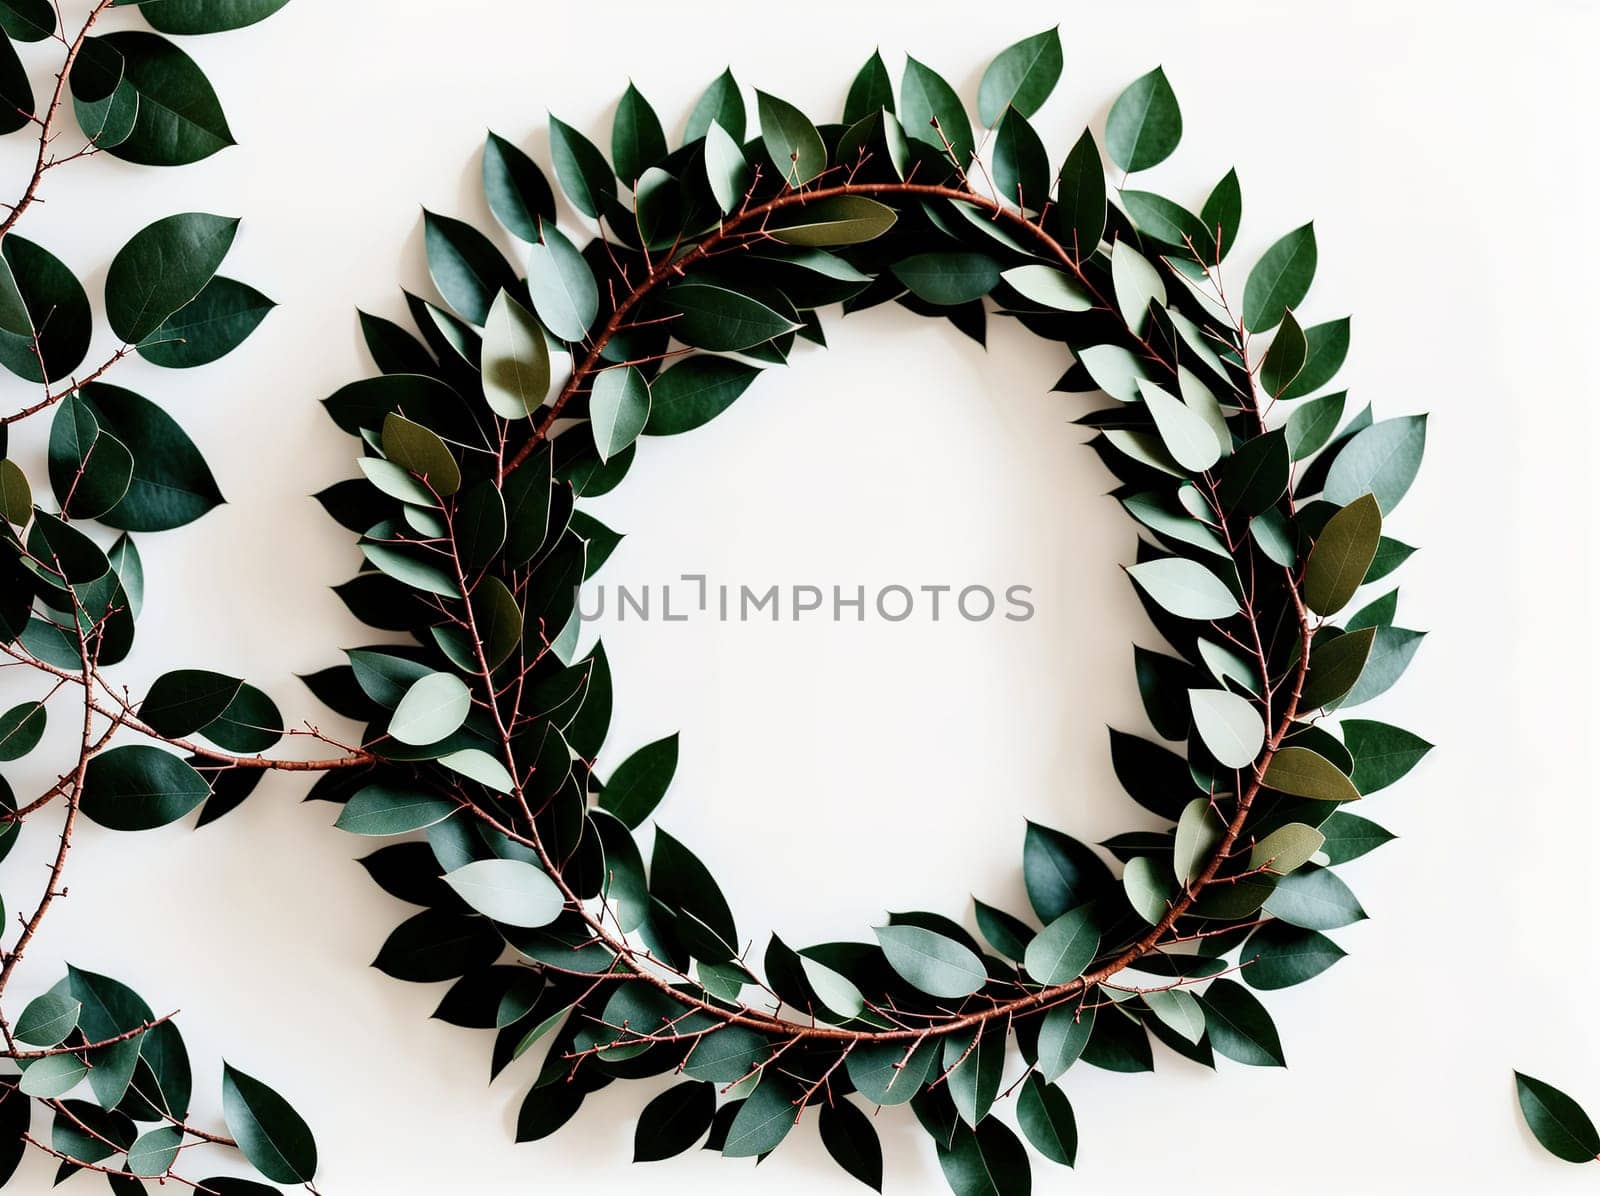 A wreath made of green leaves hanging on a wall. by creart